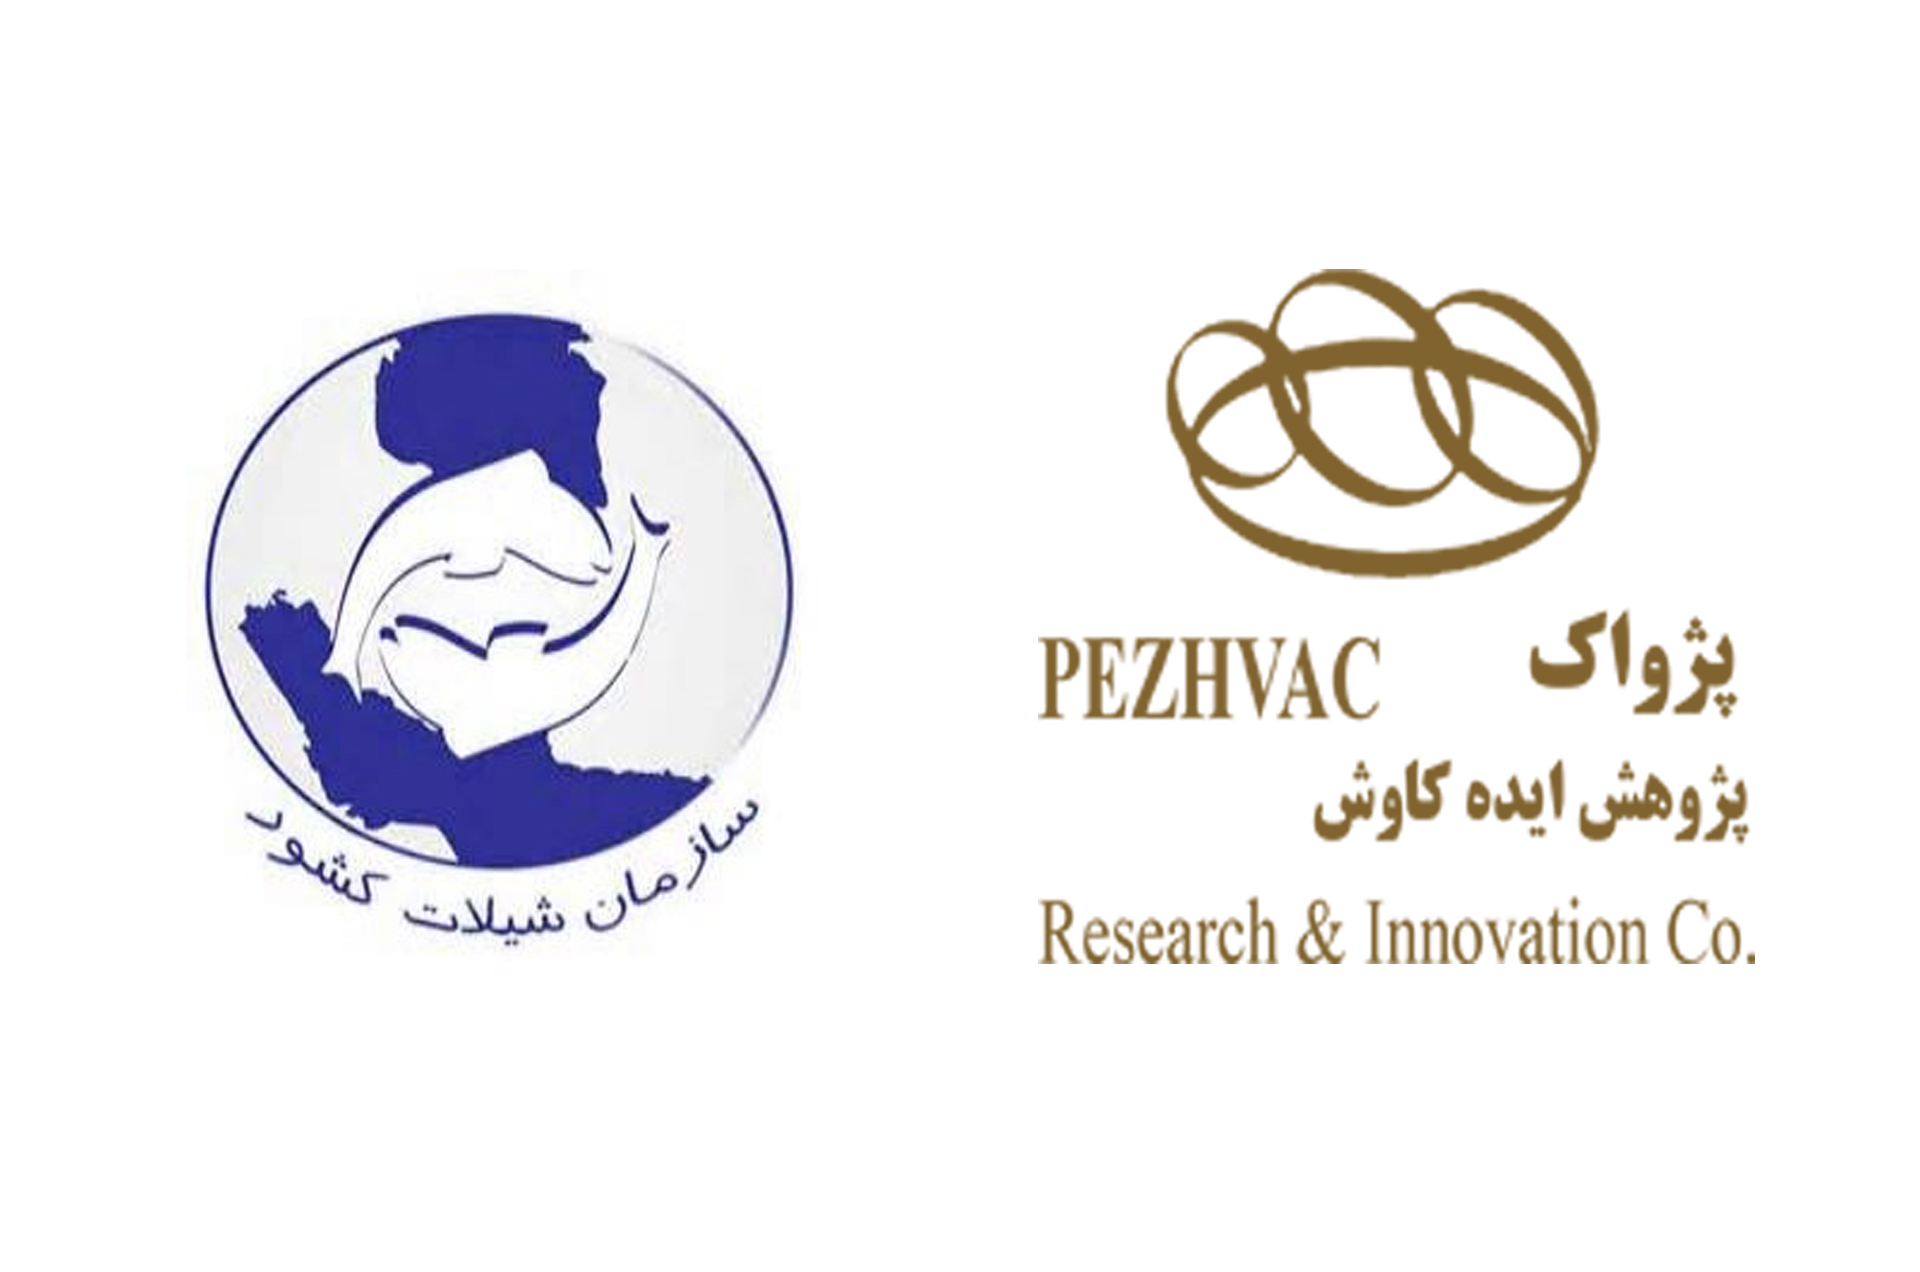 Memorandum of Understanding (MOU) In Enhancing the Potentiality of Aquaculturists and Related Industries in Iran (AUG 2017)